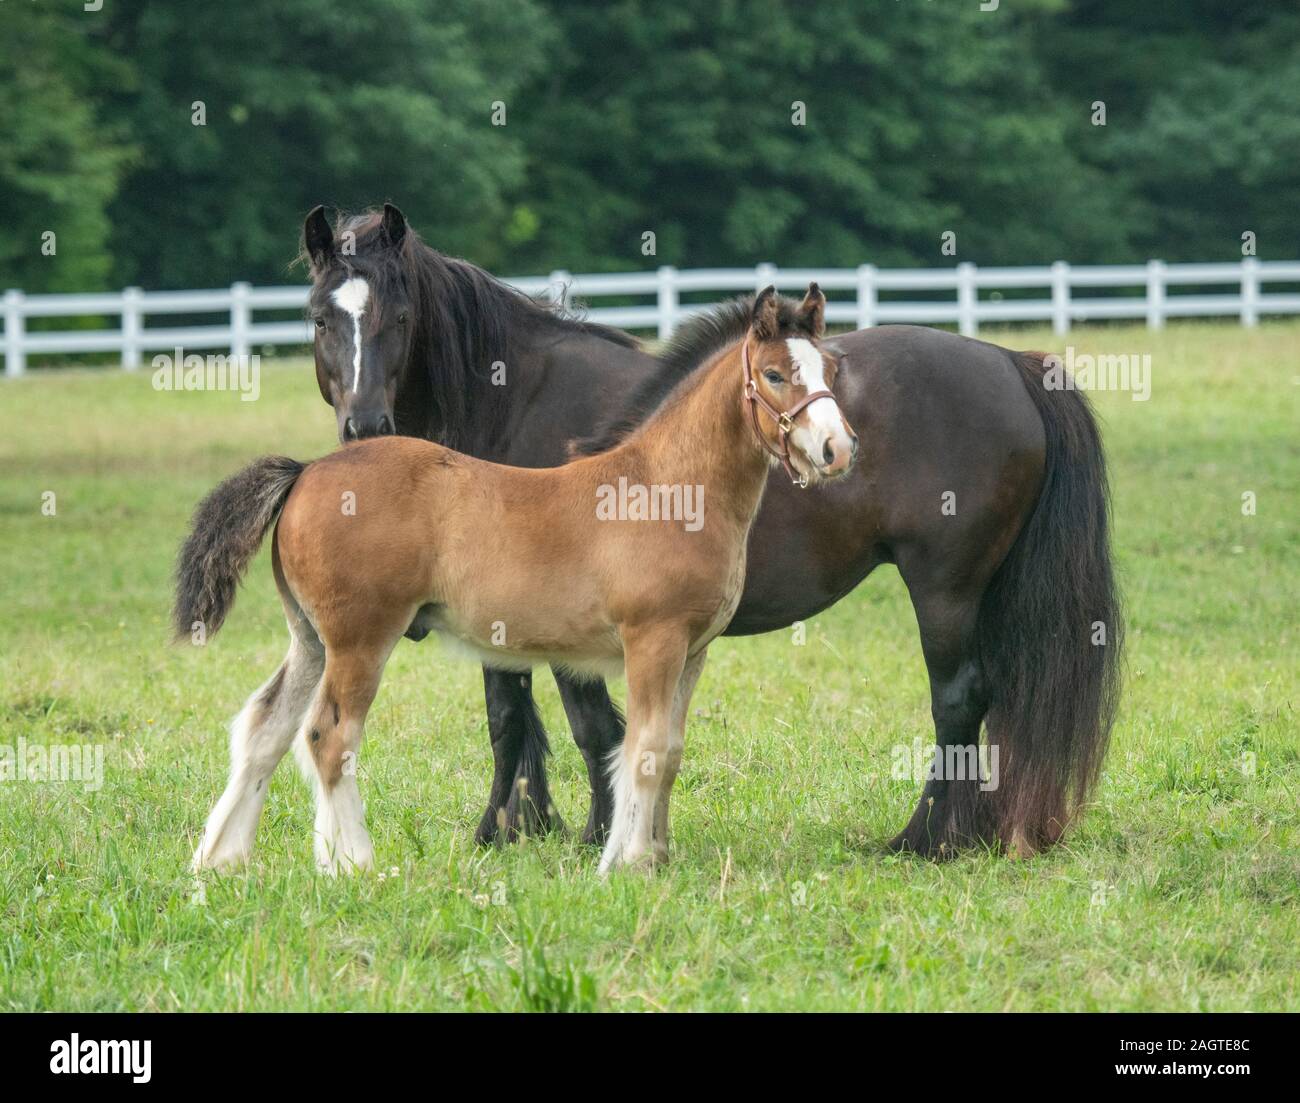 Gypsy cob horse mare and foal in green paddock Stock Photo